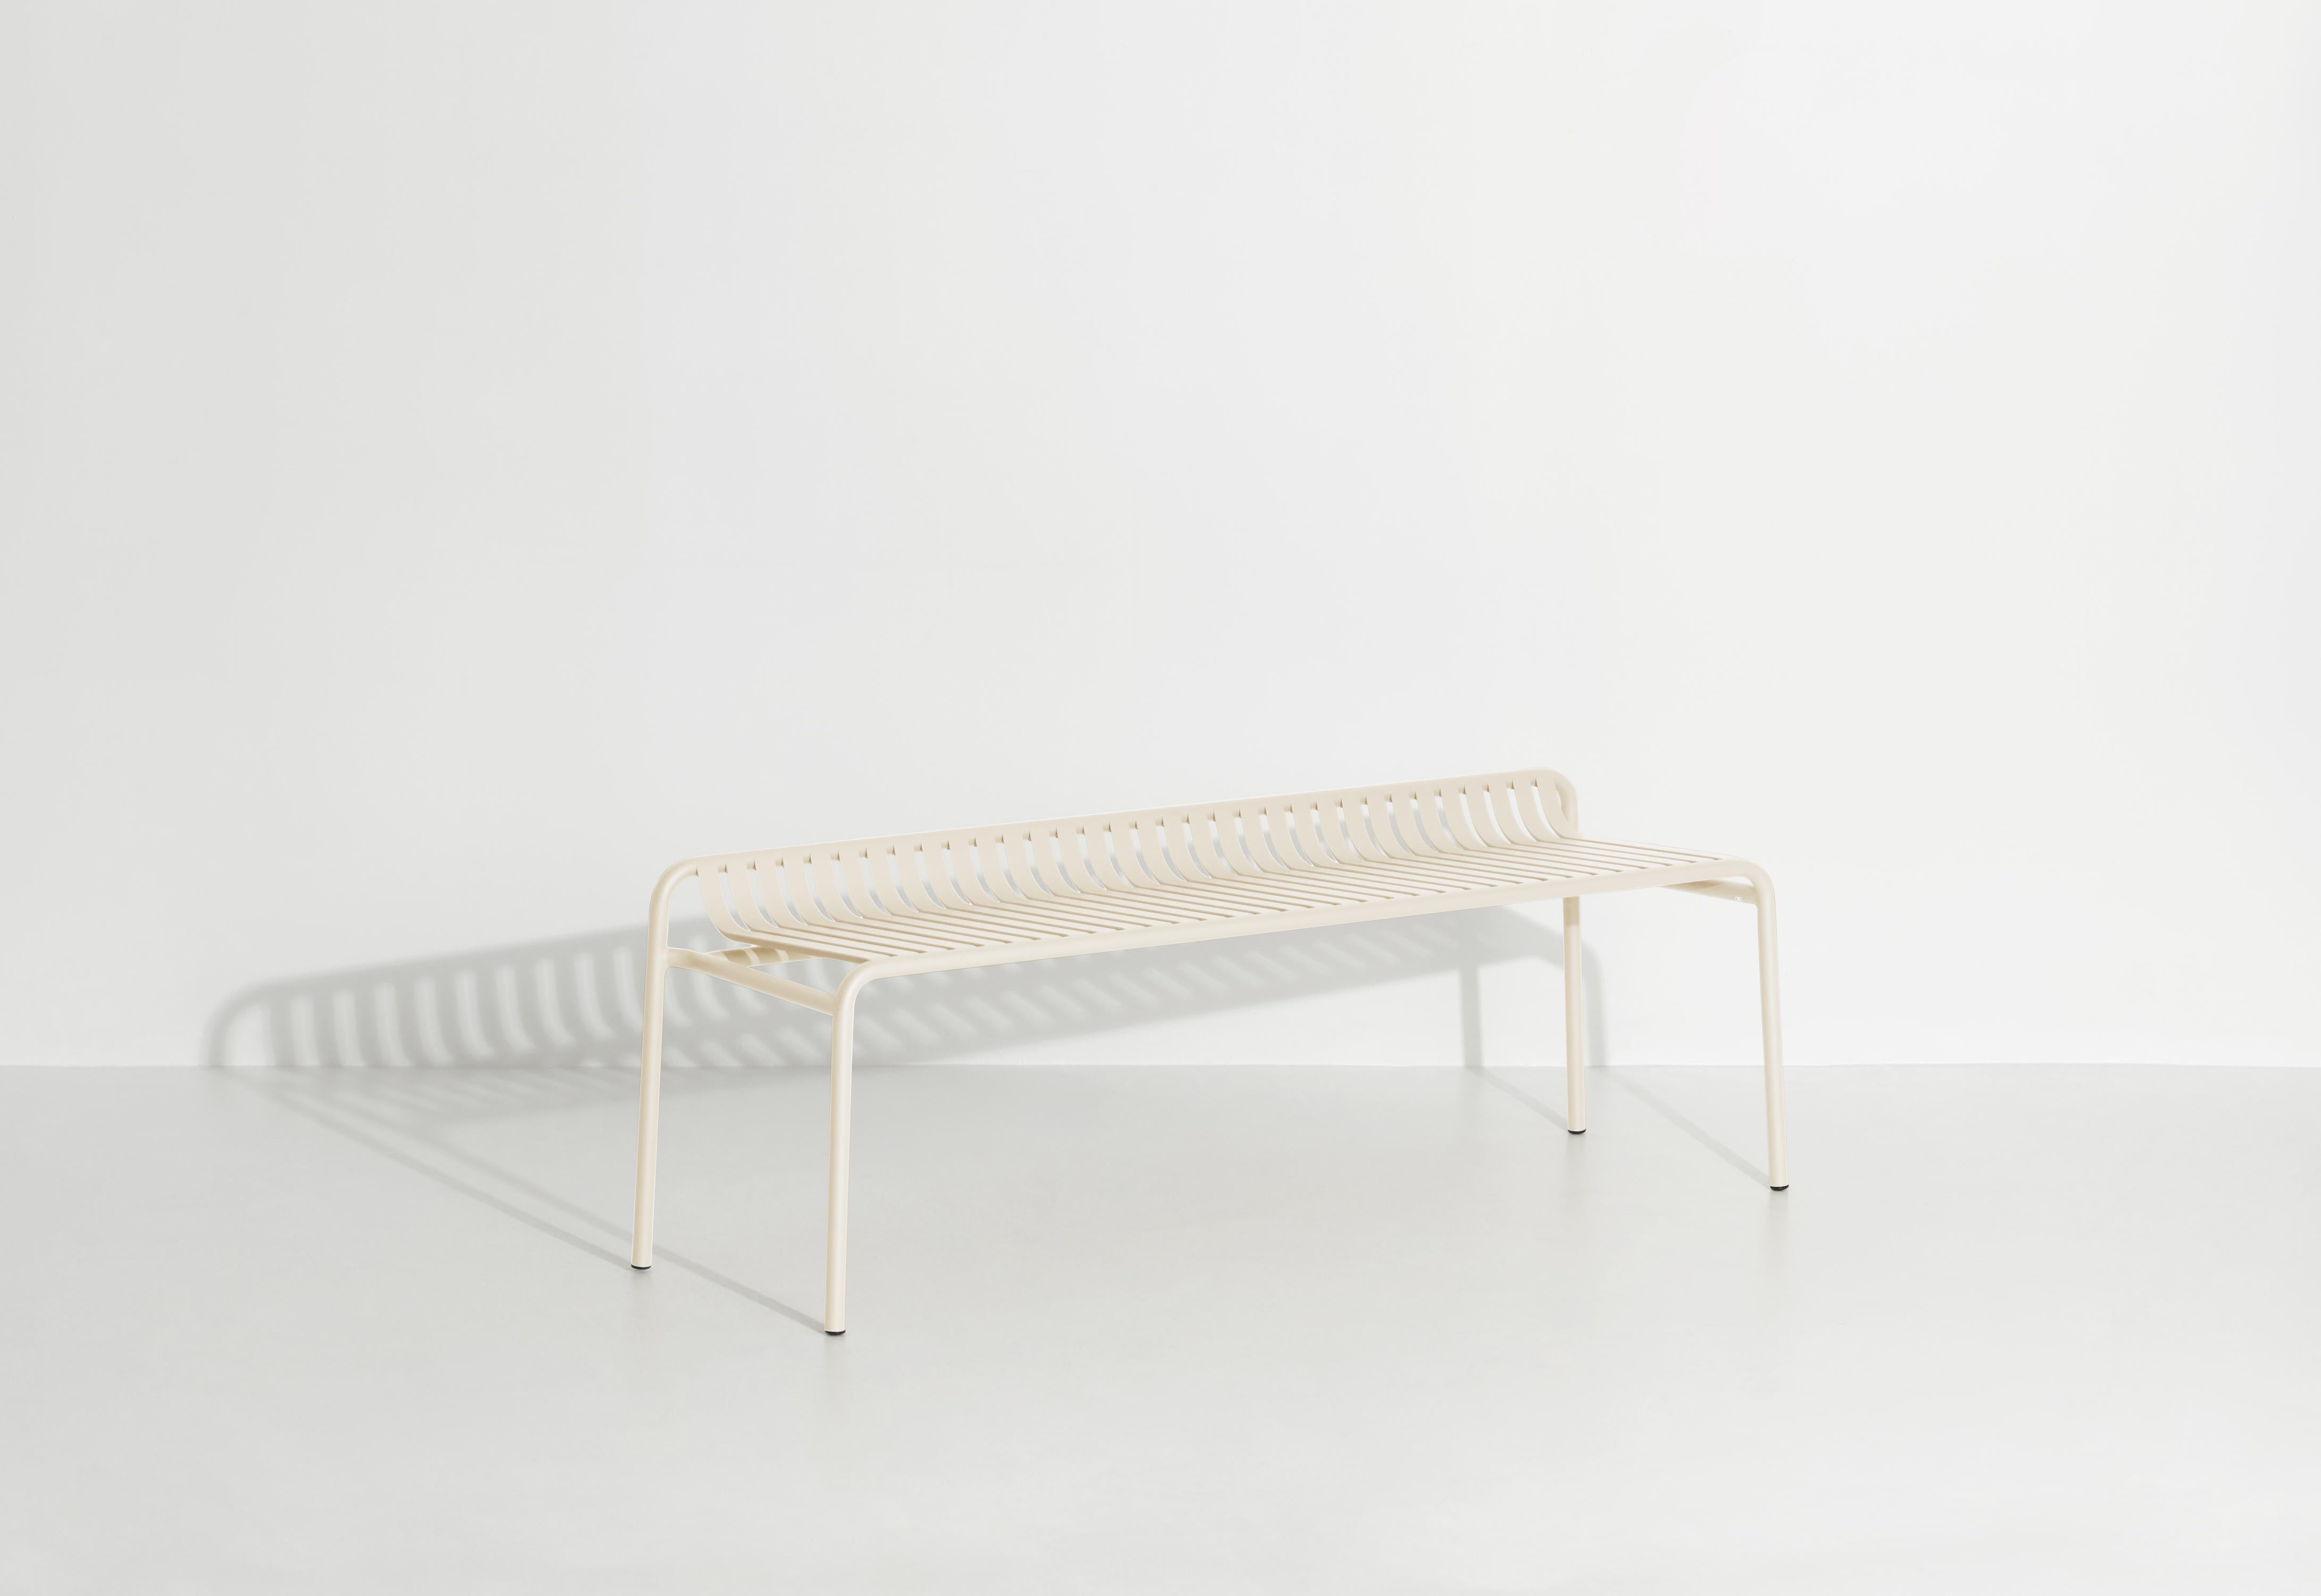 Petite Friture Week-End Bench without Back in Ivory Aluminium by Studio BrichetZiegler, 2017

The week-end collection is a full range of outdoor furniture, in aluminium grained epoxy paint, matt finish, that includes 18 functions and 8 colours for